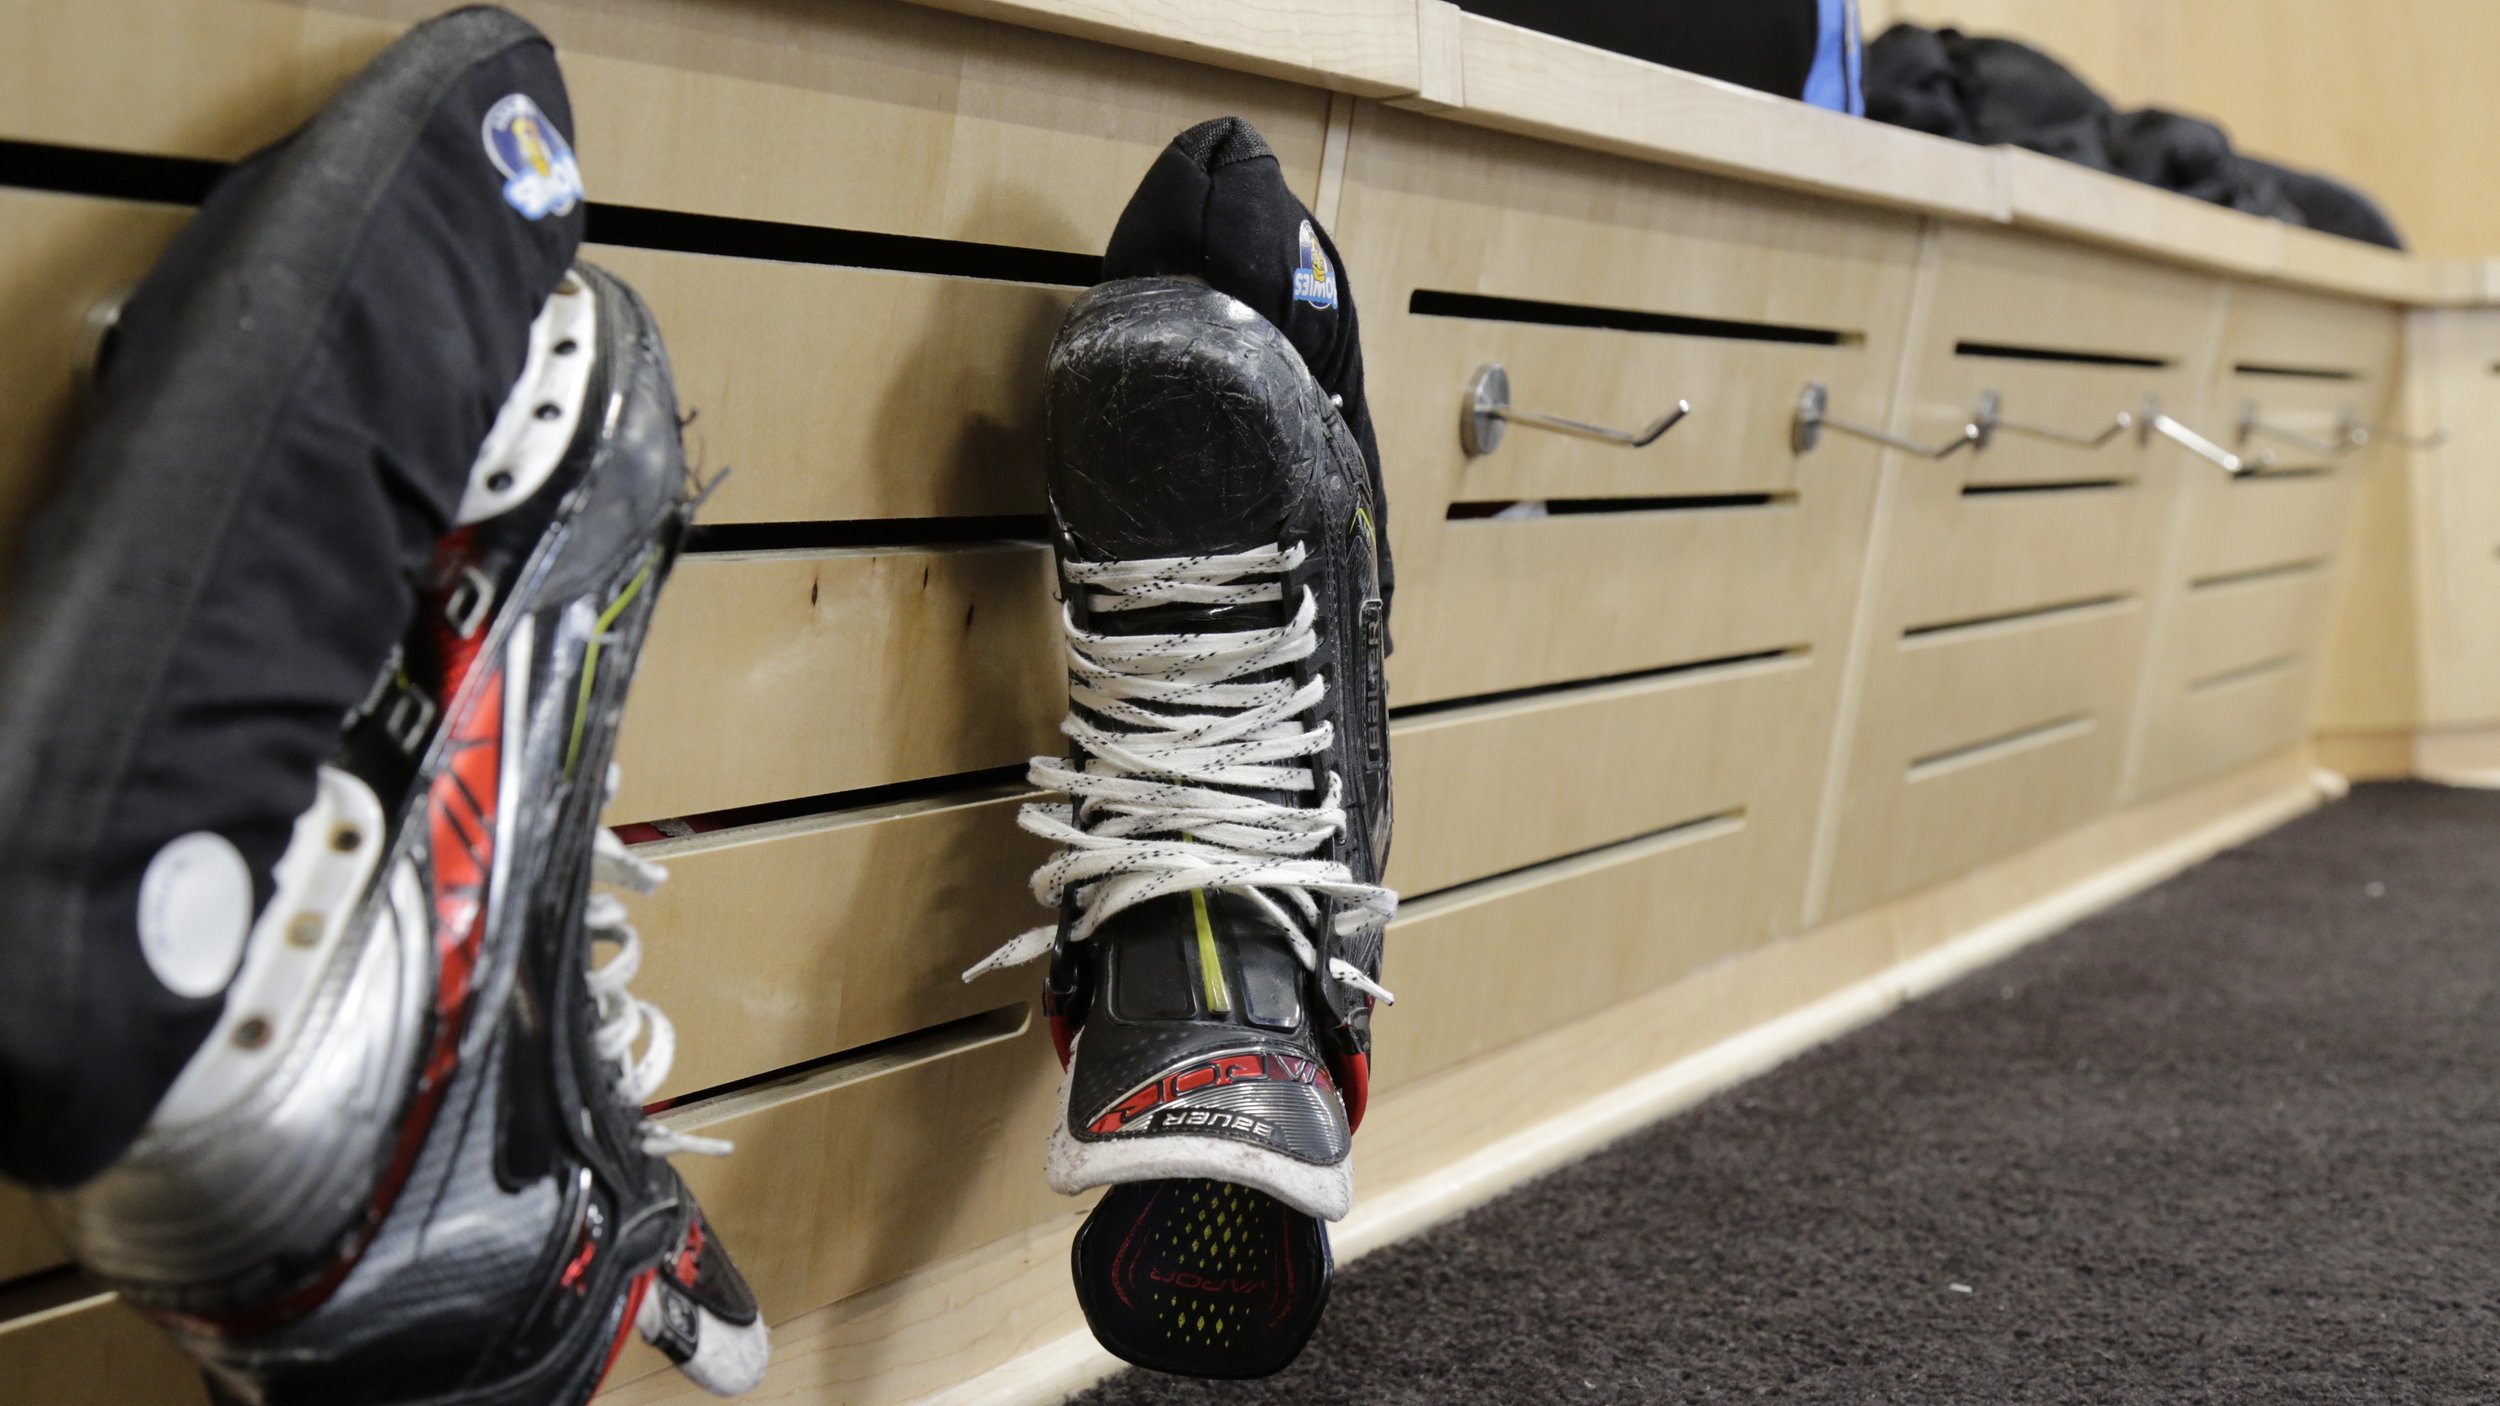 Closer Look at Skates Hanging on Lower Part of Lockers